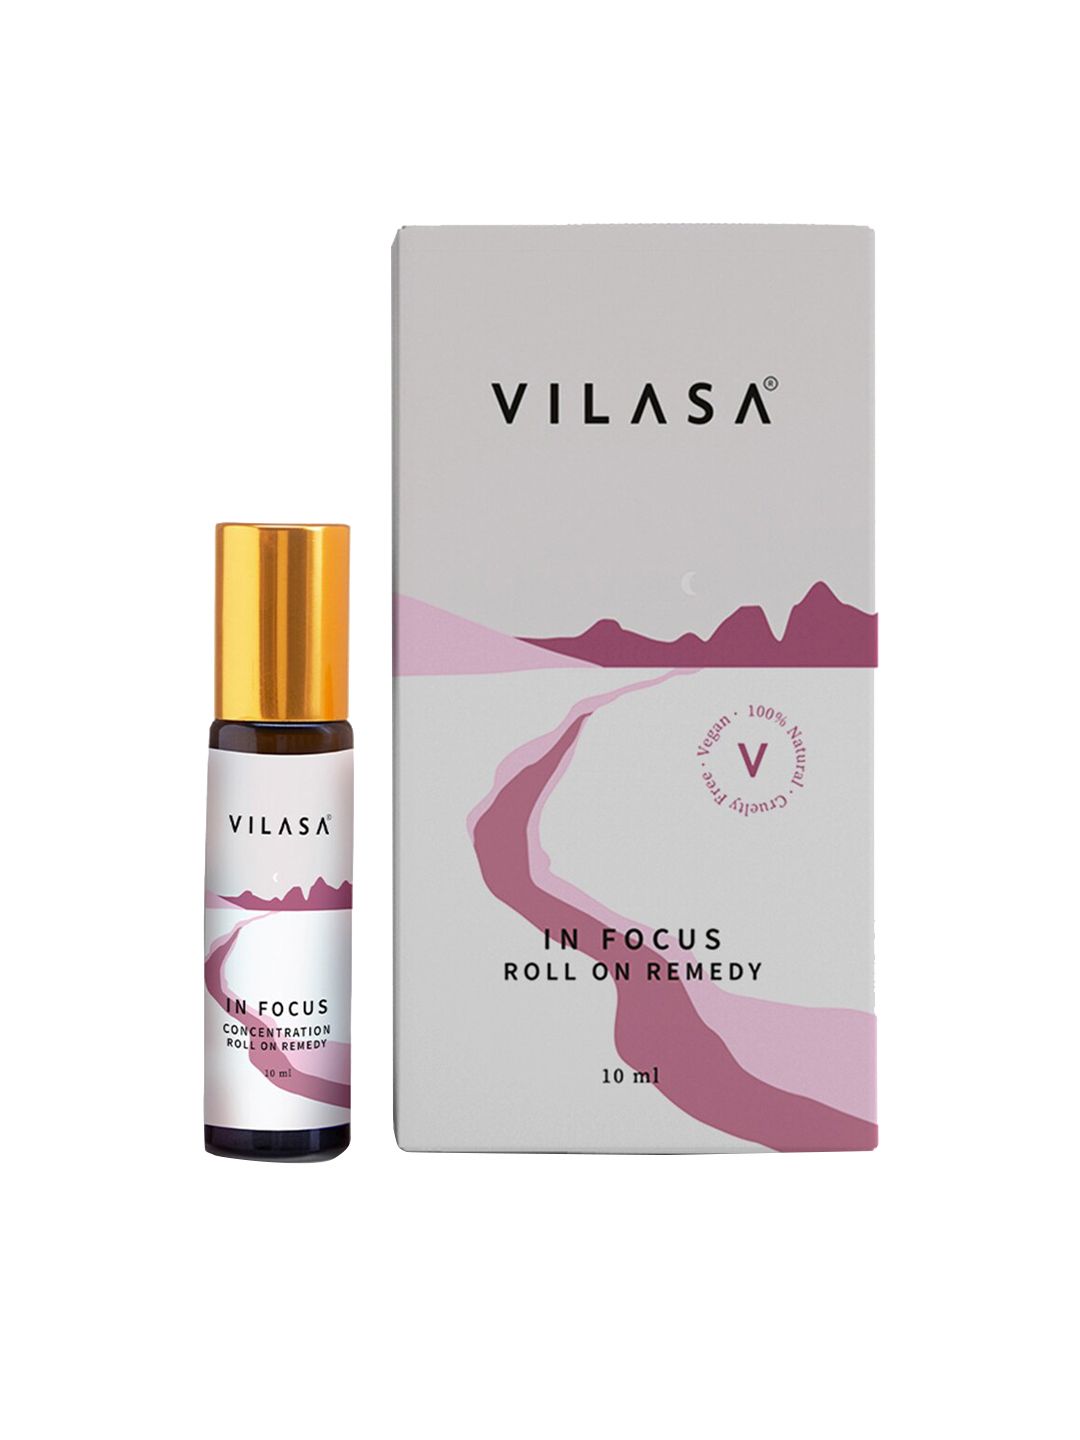 VILASA In Focus Roll On Remedy Body Mist - 10 ml Price in India